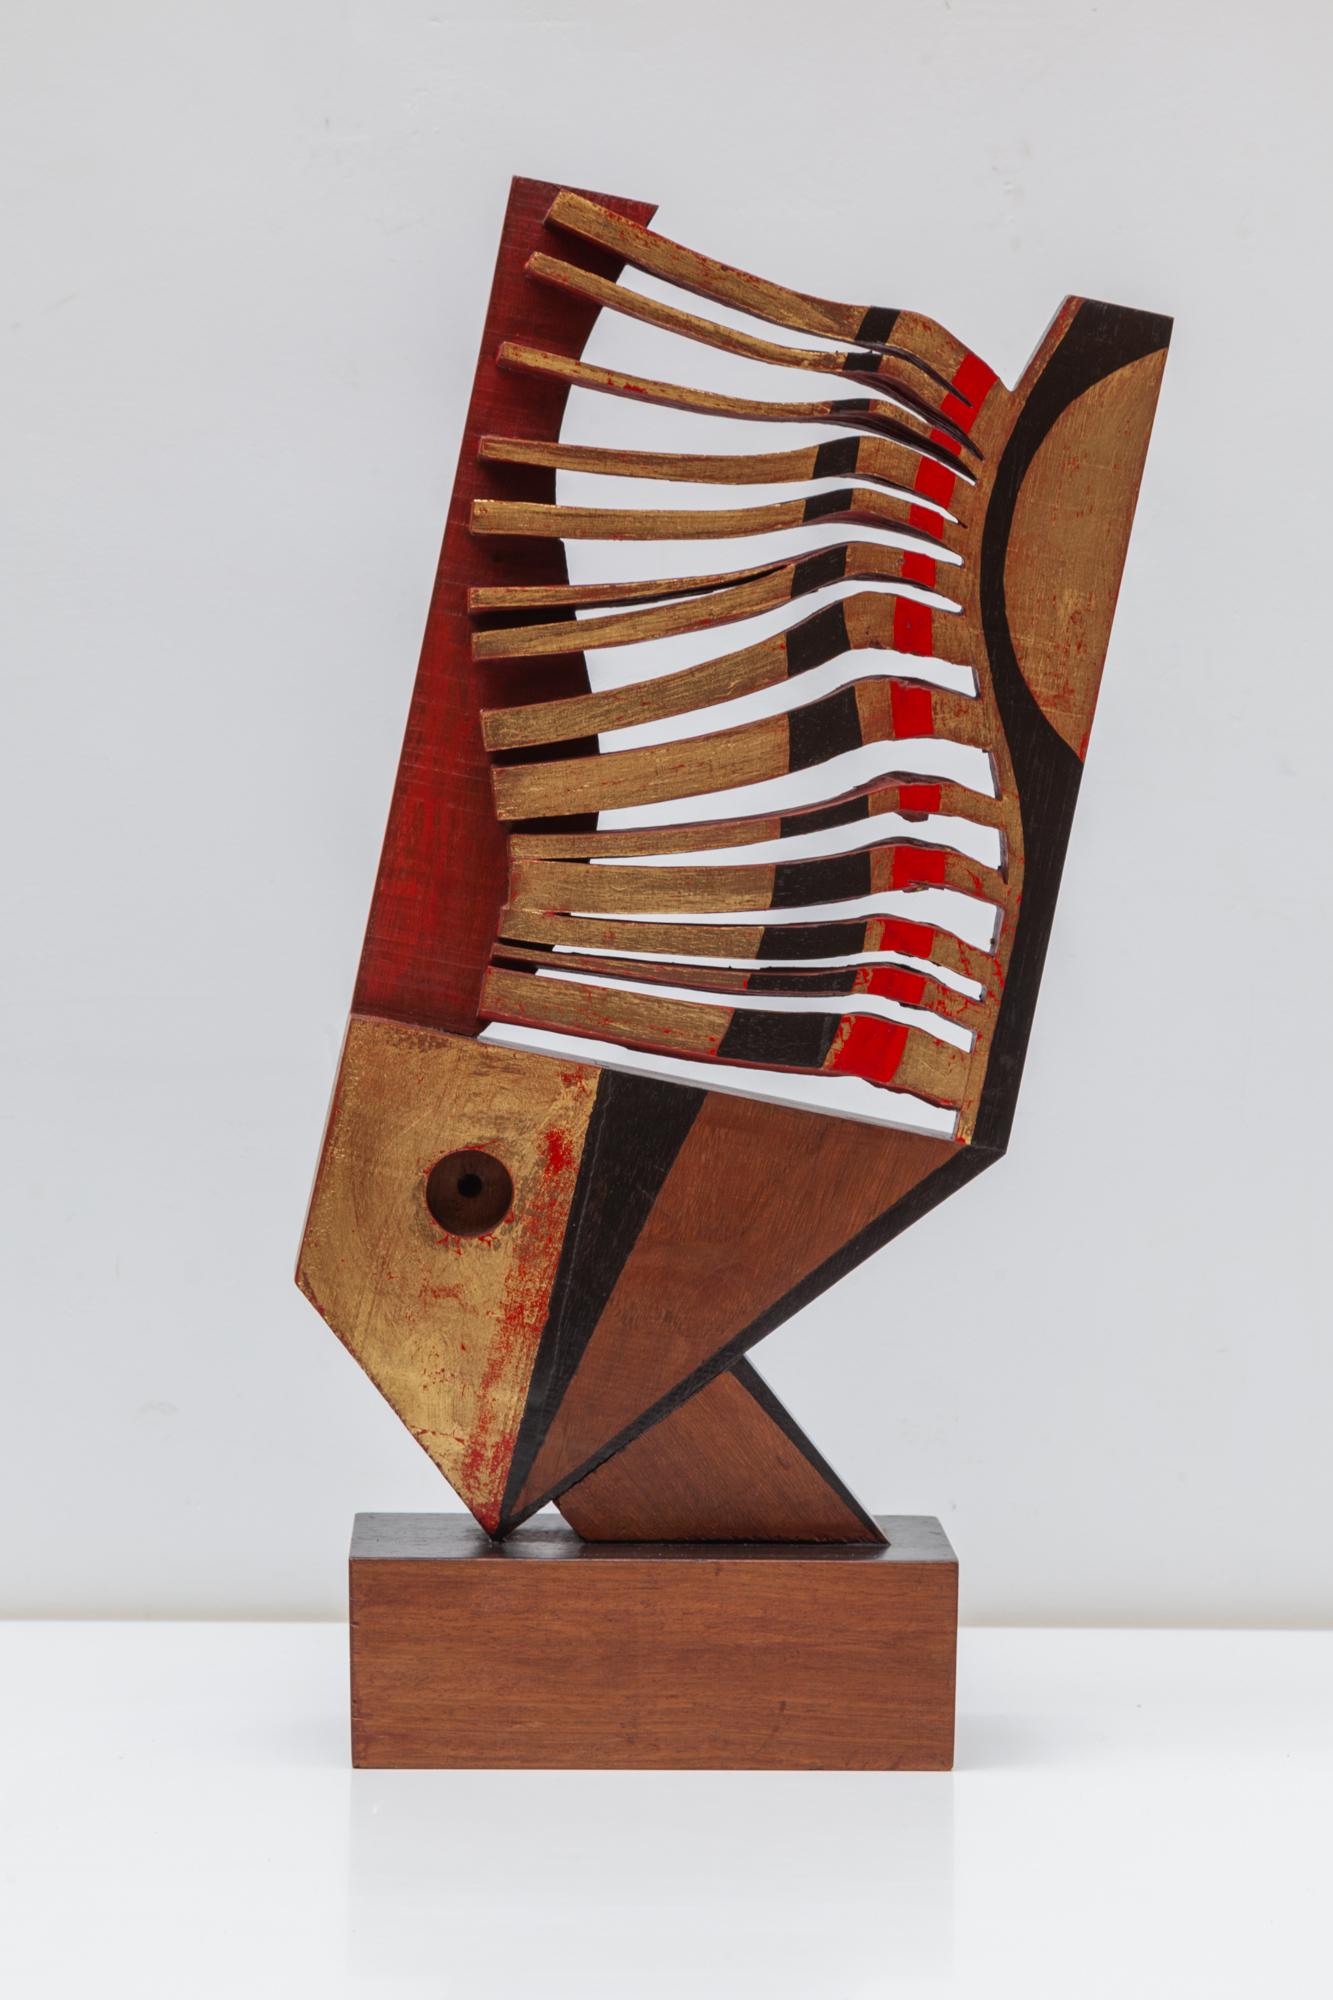 Wooden Fisch sculpture by the Artist Jhan Paulussen, Belgium, 1960s. Signed JH. Modernist dynamic wave design in red, black and gold.

Dimension: 27 W x 60 H x 12 D cm.